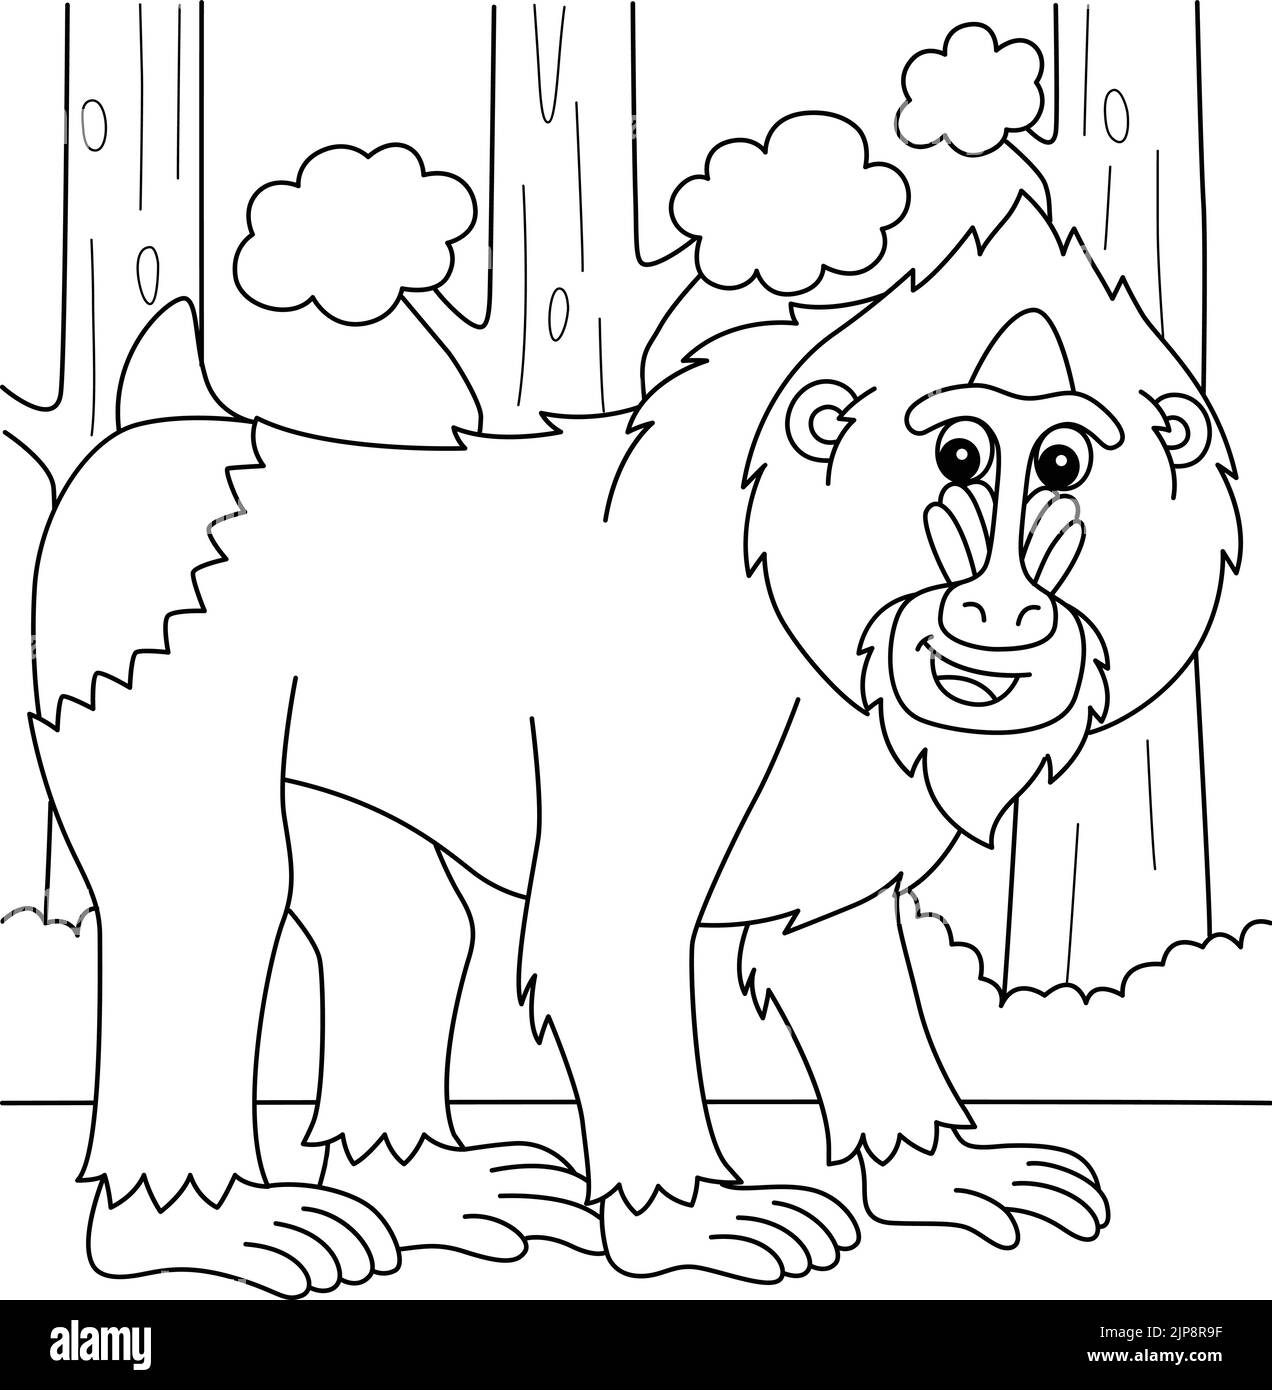 Mandrill Animal Coloring Page for Kids Stock Vector